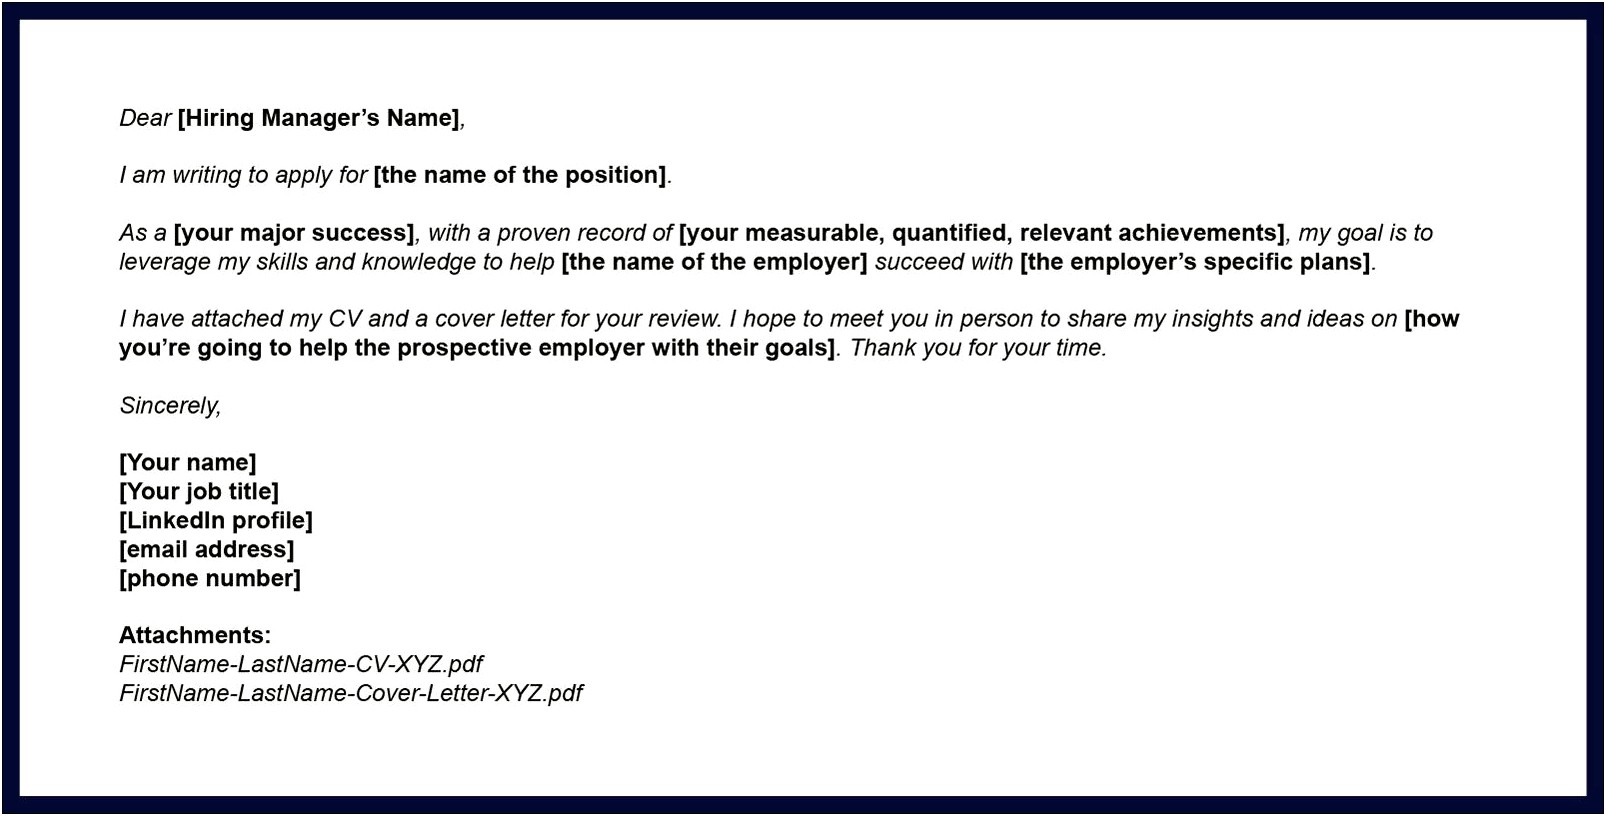 Best Format To Submit Resume Online